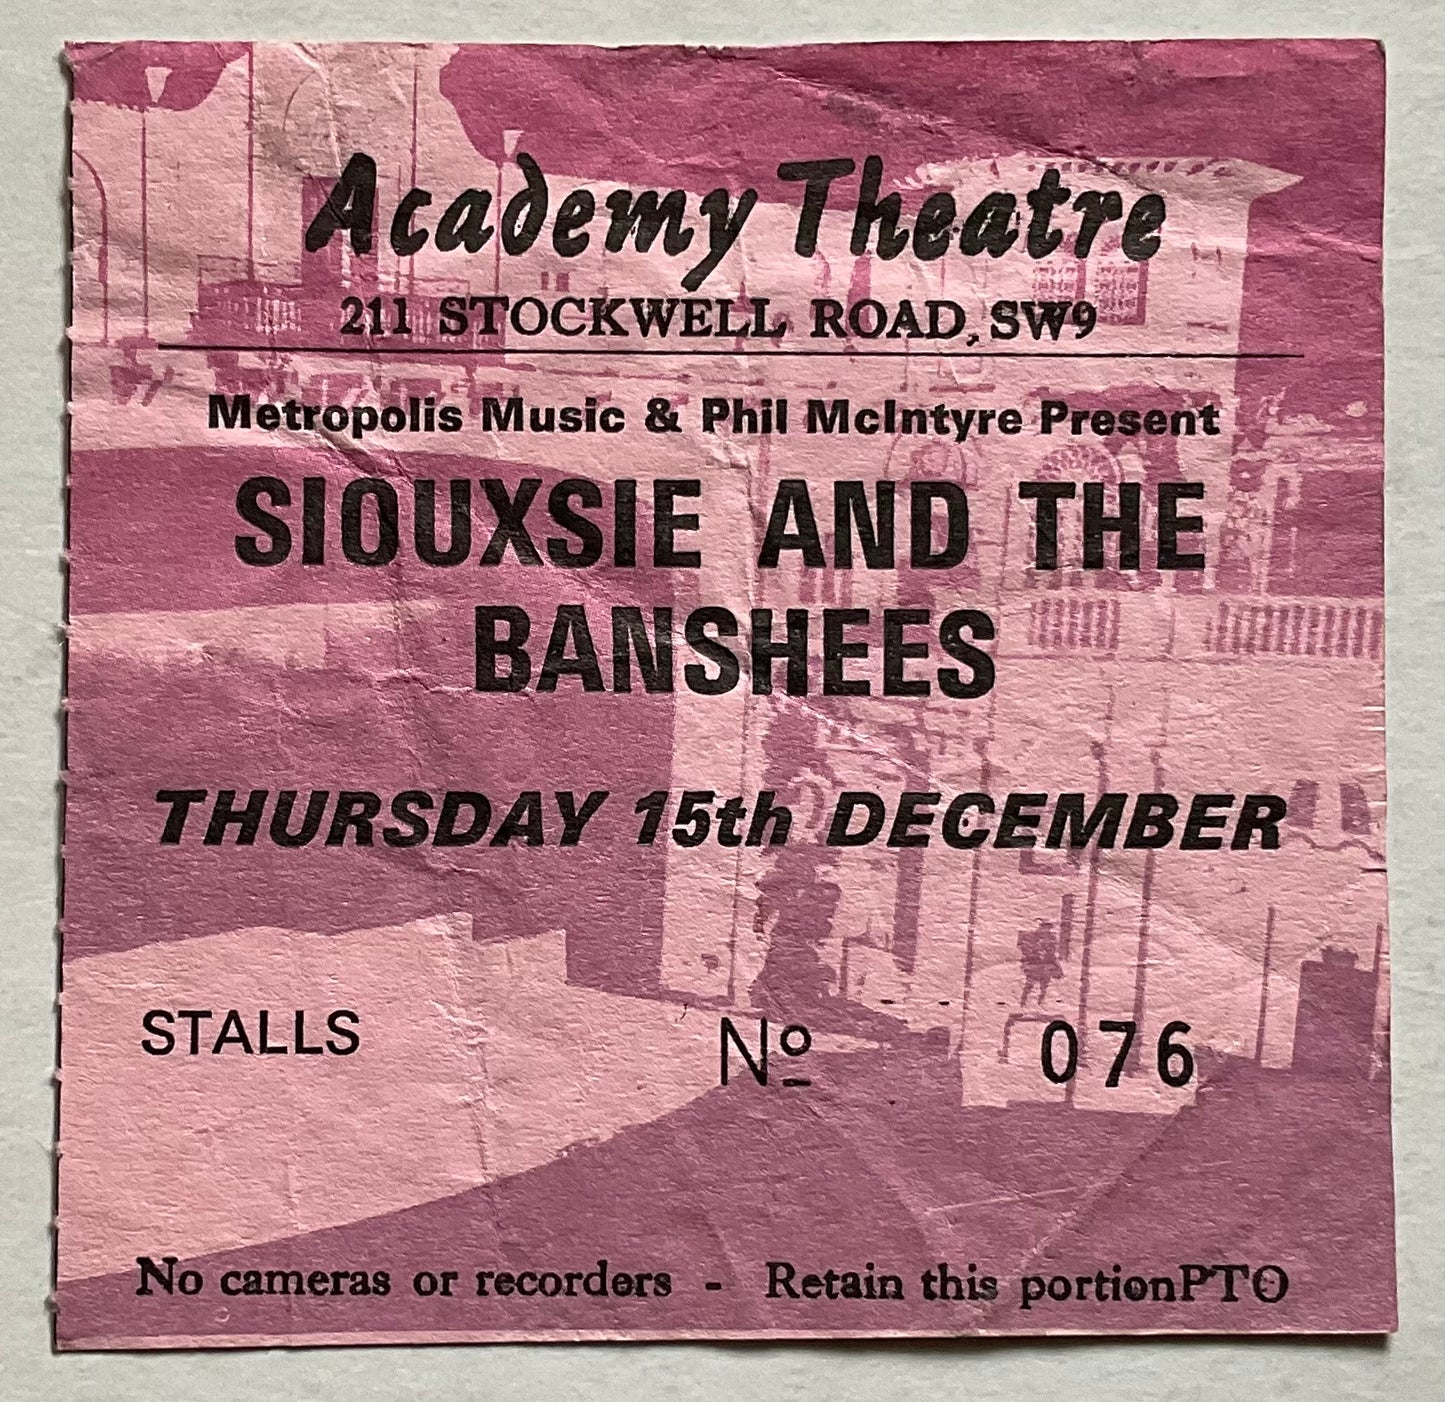 Siouxsie & the Banshees Original Used Concert Ticket Academy Theatre London 15th Dec 1988